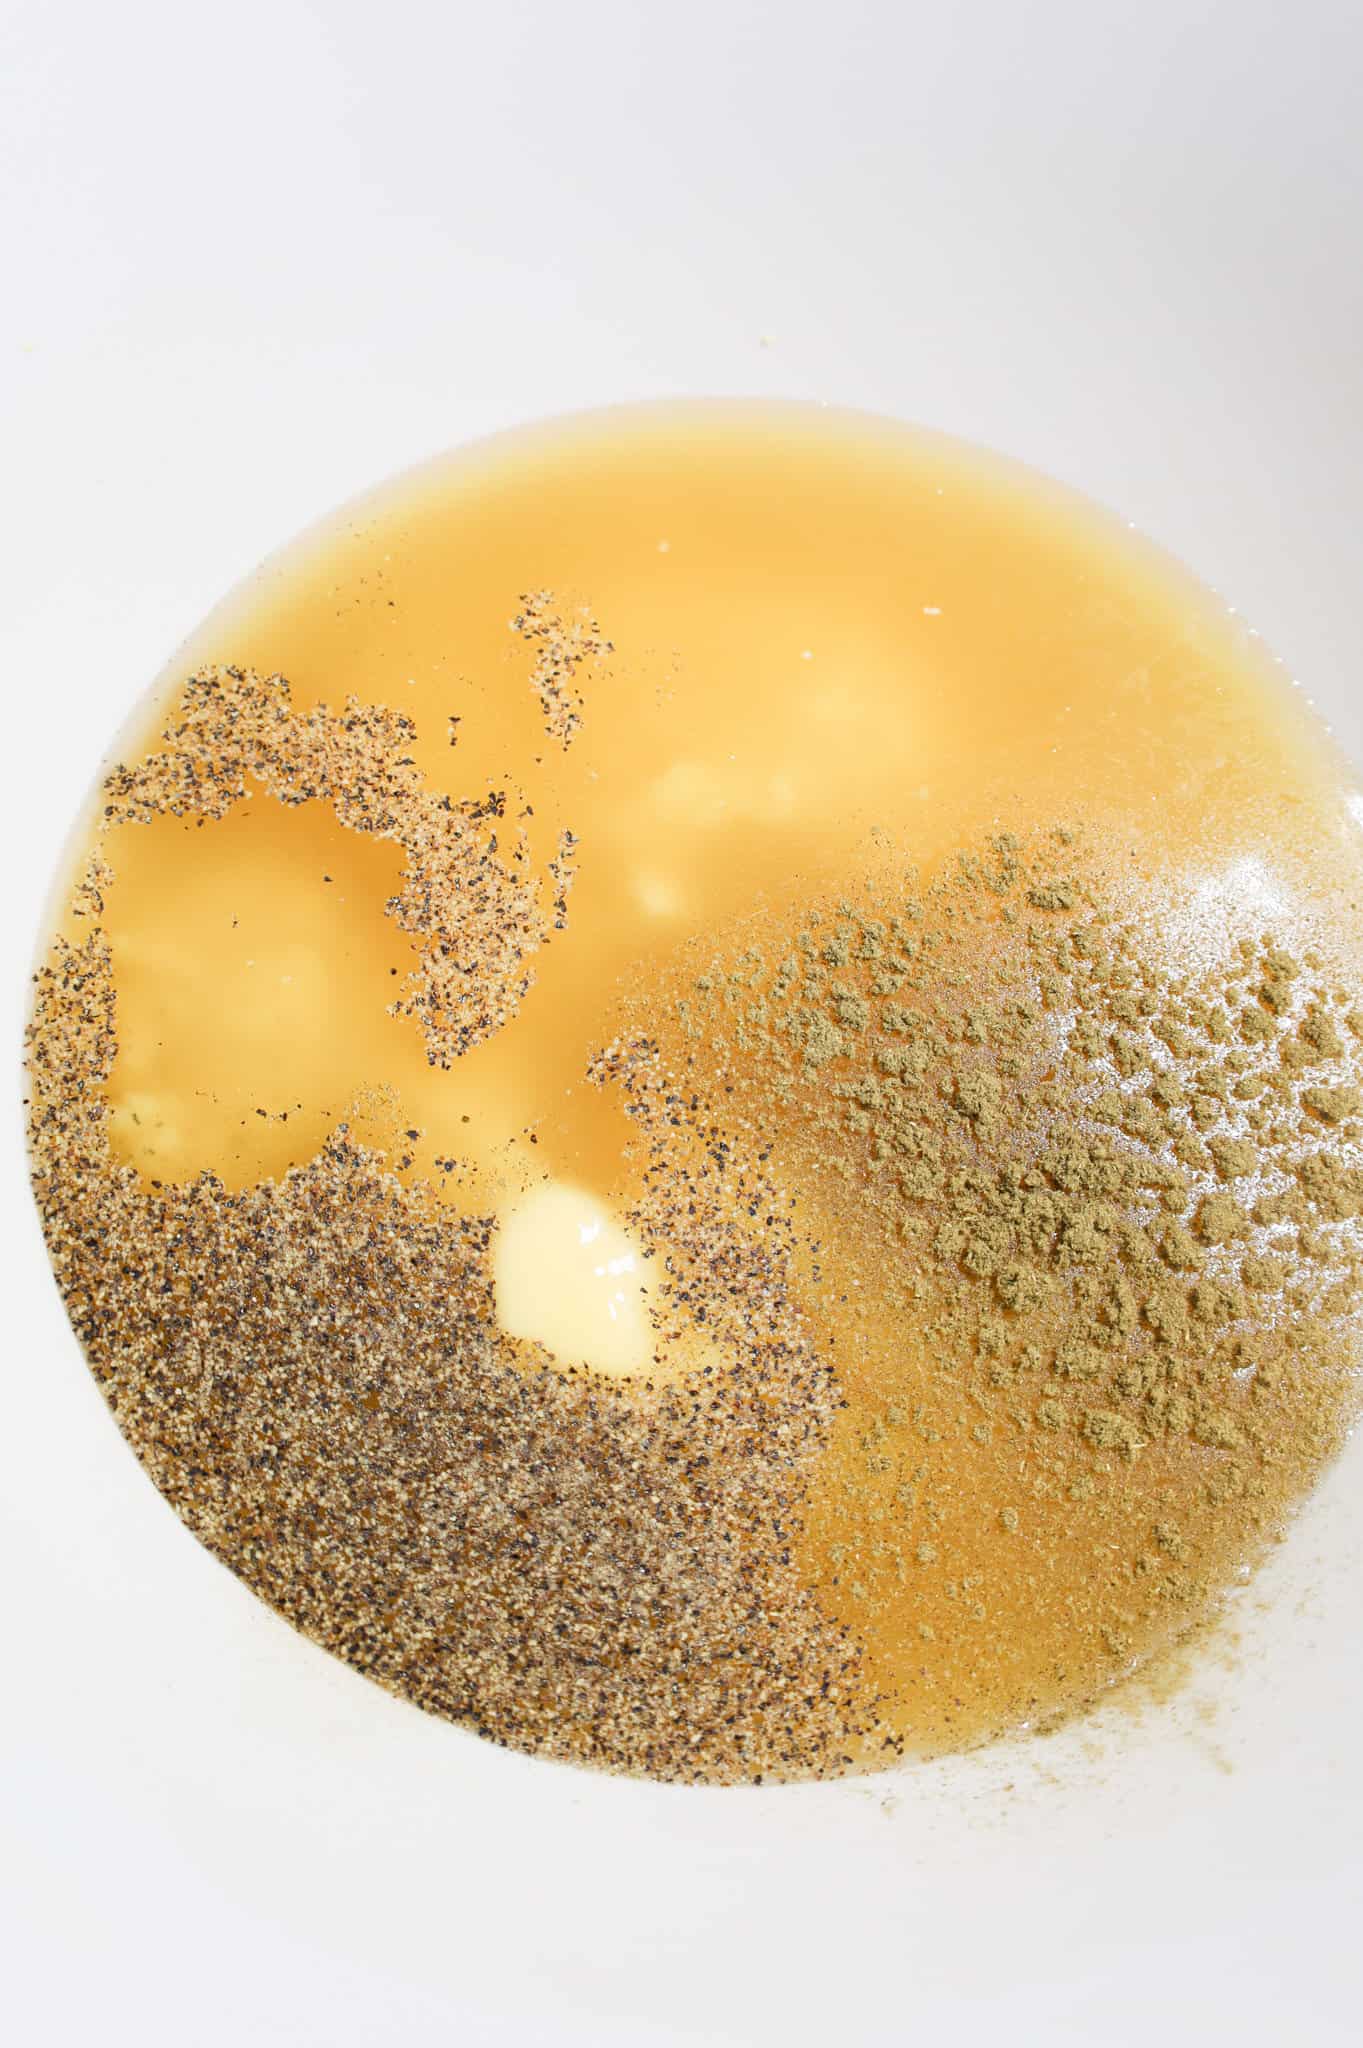 salt, pepper, sage and chicken broth in a mixing bowl